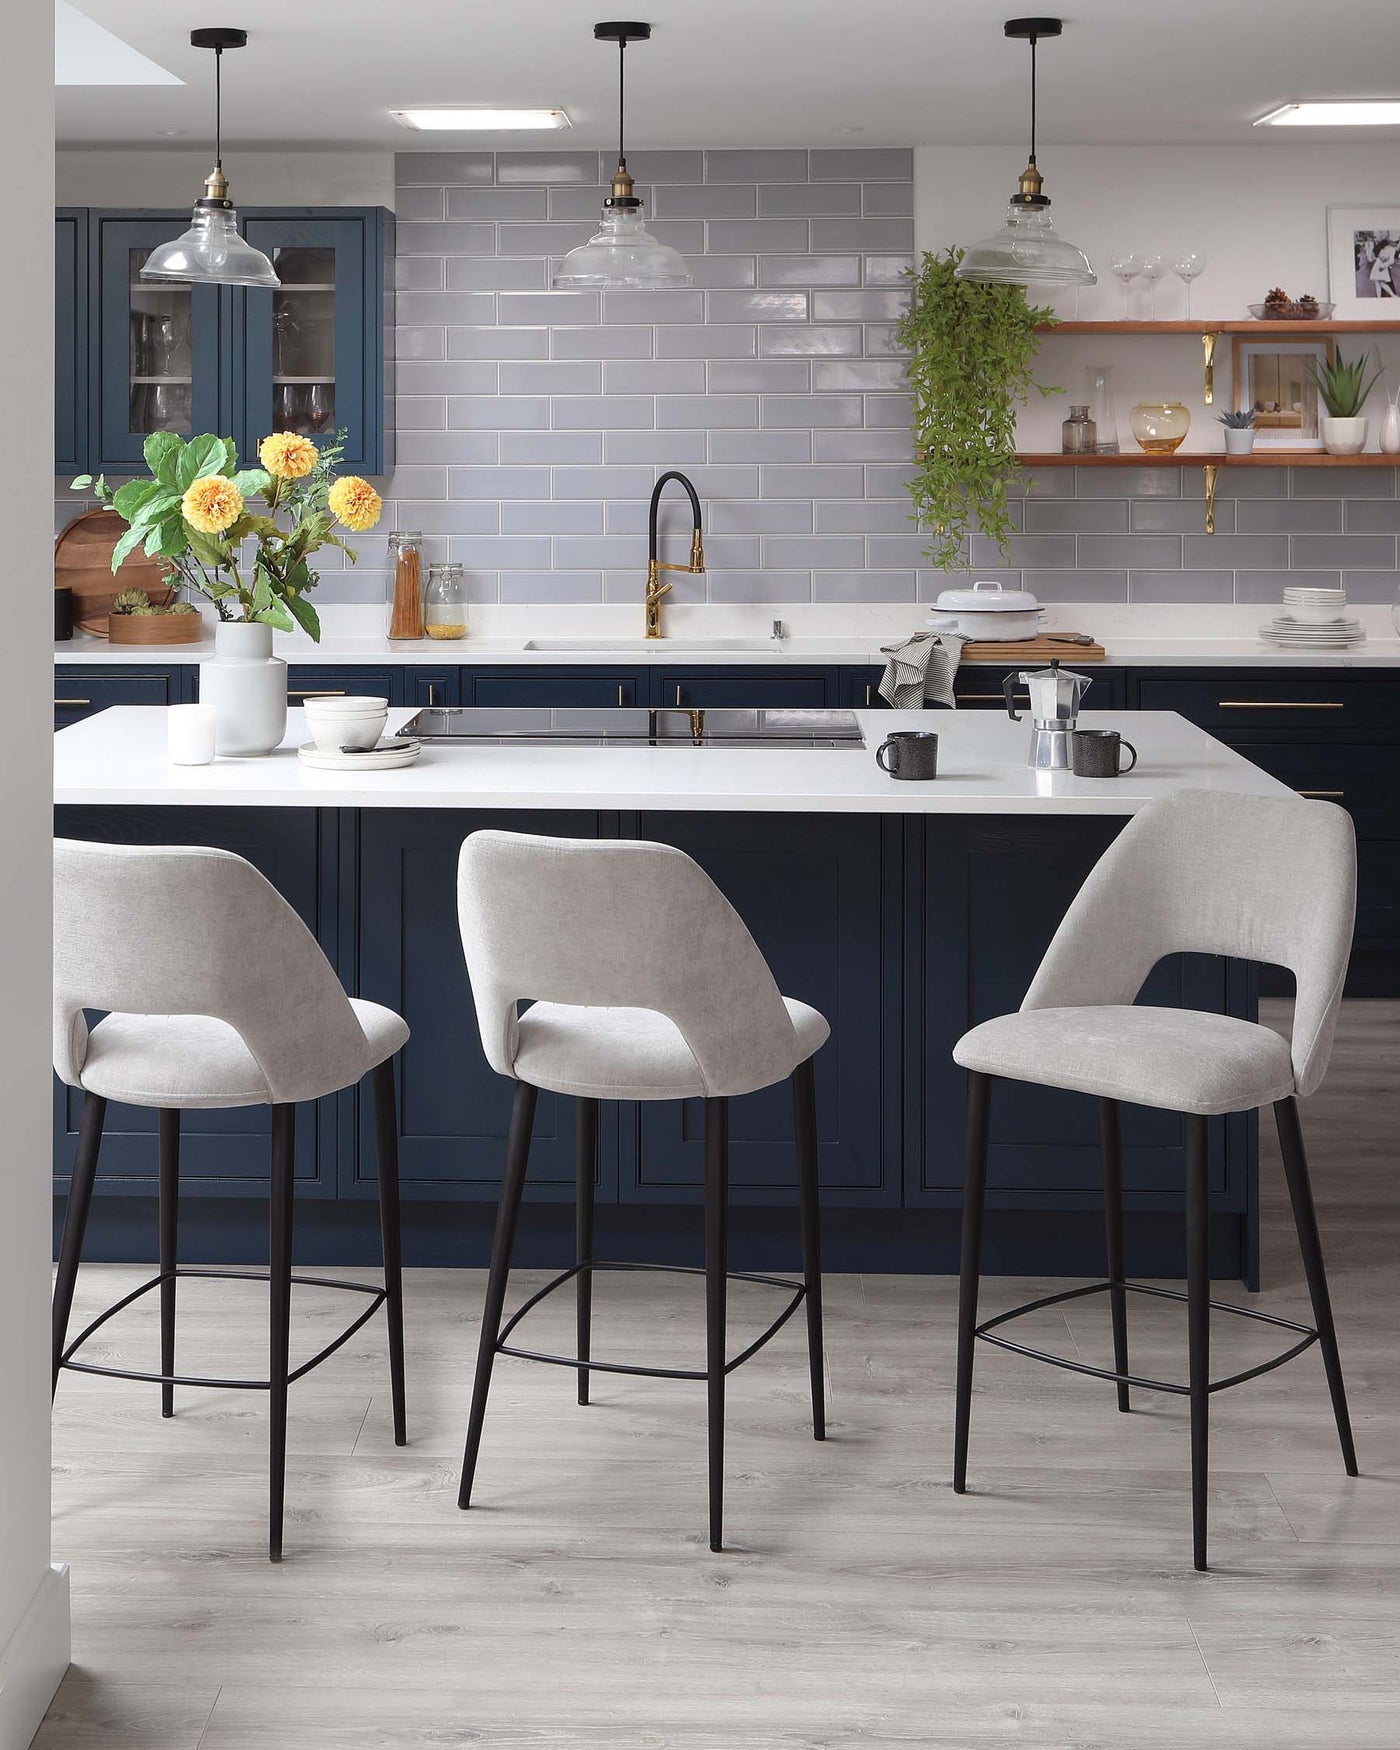 Three modern upholstered bar stools with sleek legs and footrests at a kitchen island.